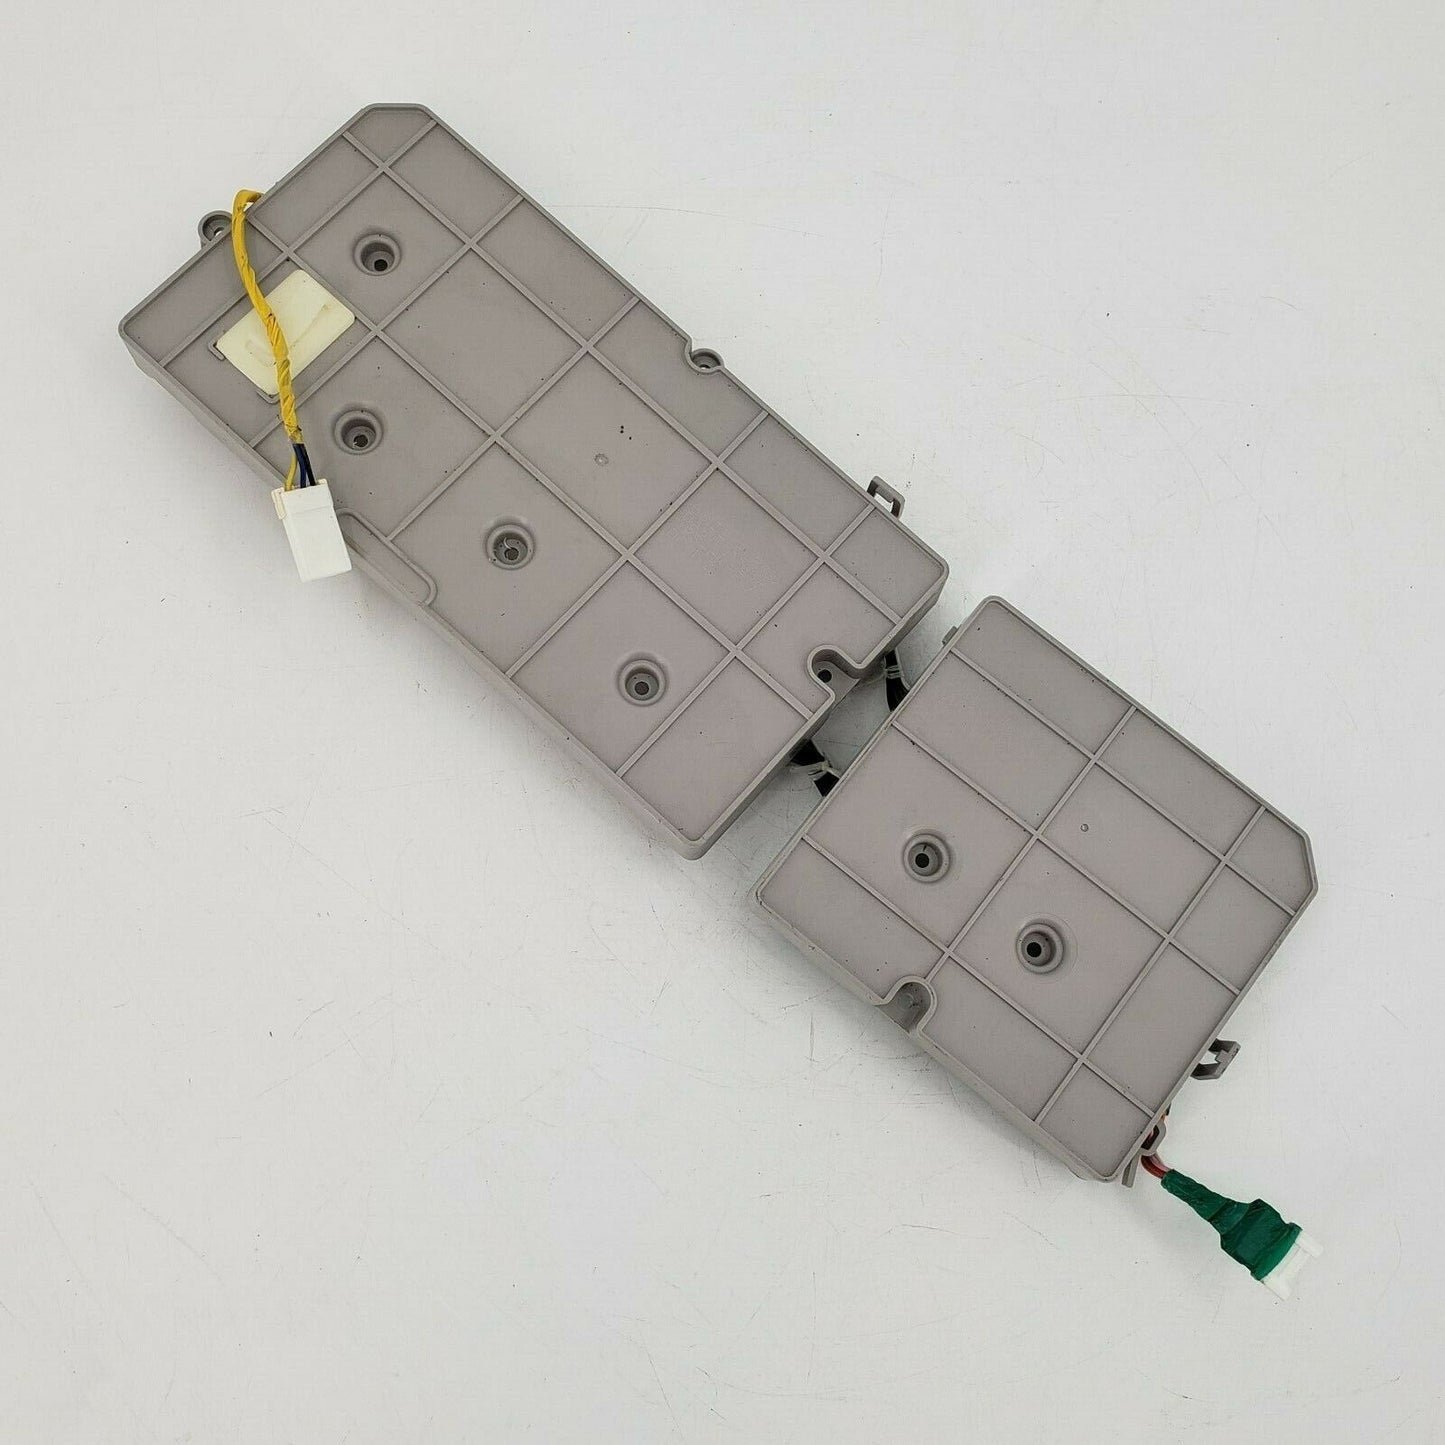 Genuine OEM Replacement for Samsung Dryer Control DC92-00127A